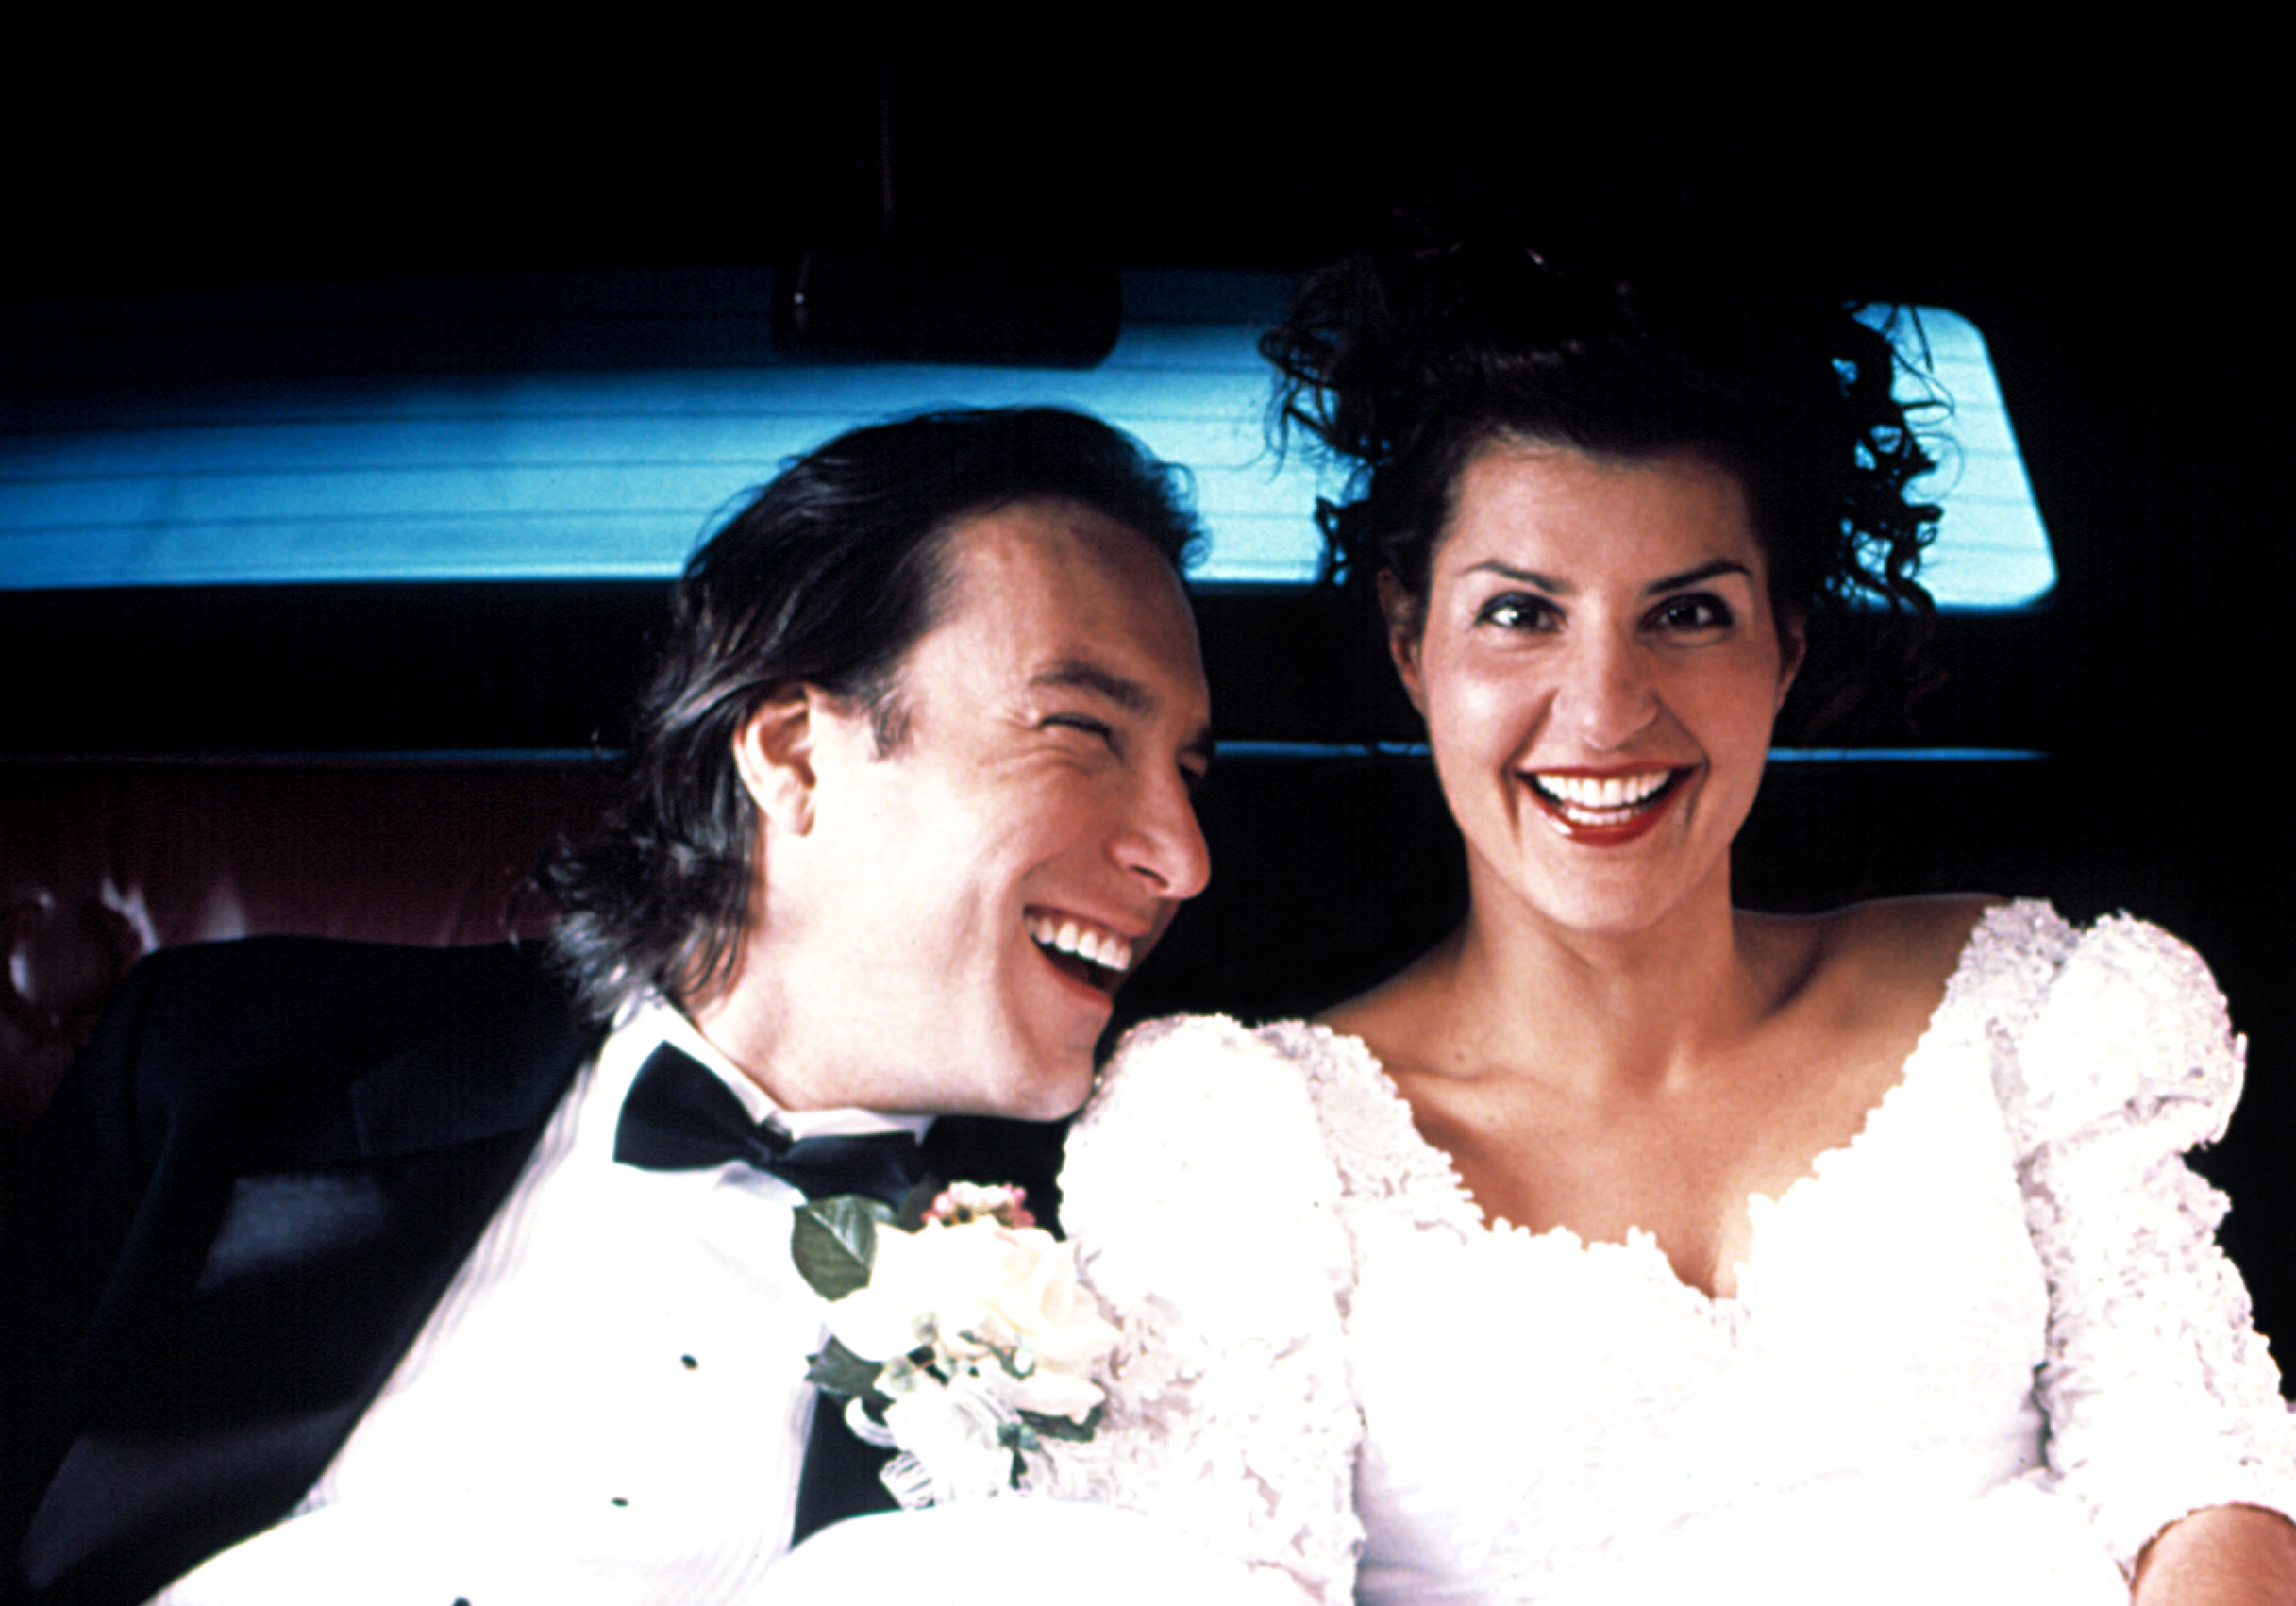 John Corbett and Nia Vardalos from &quot;My Big Fat Greek Wedding&quot; smiling in groom and bride outfits in a car